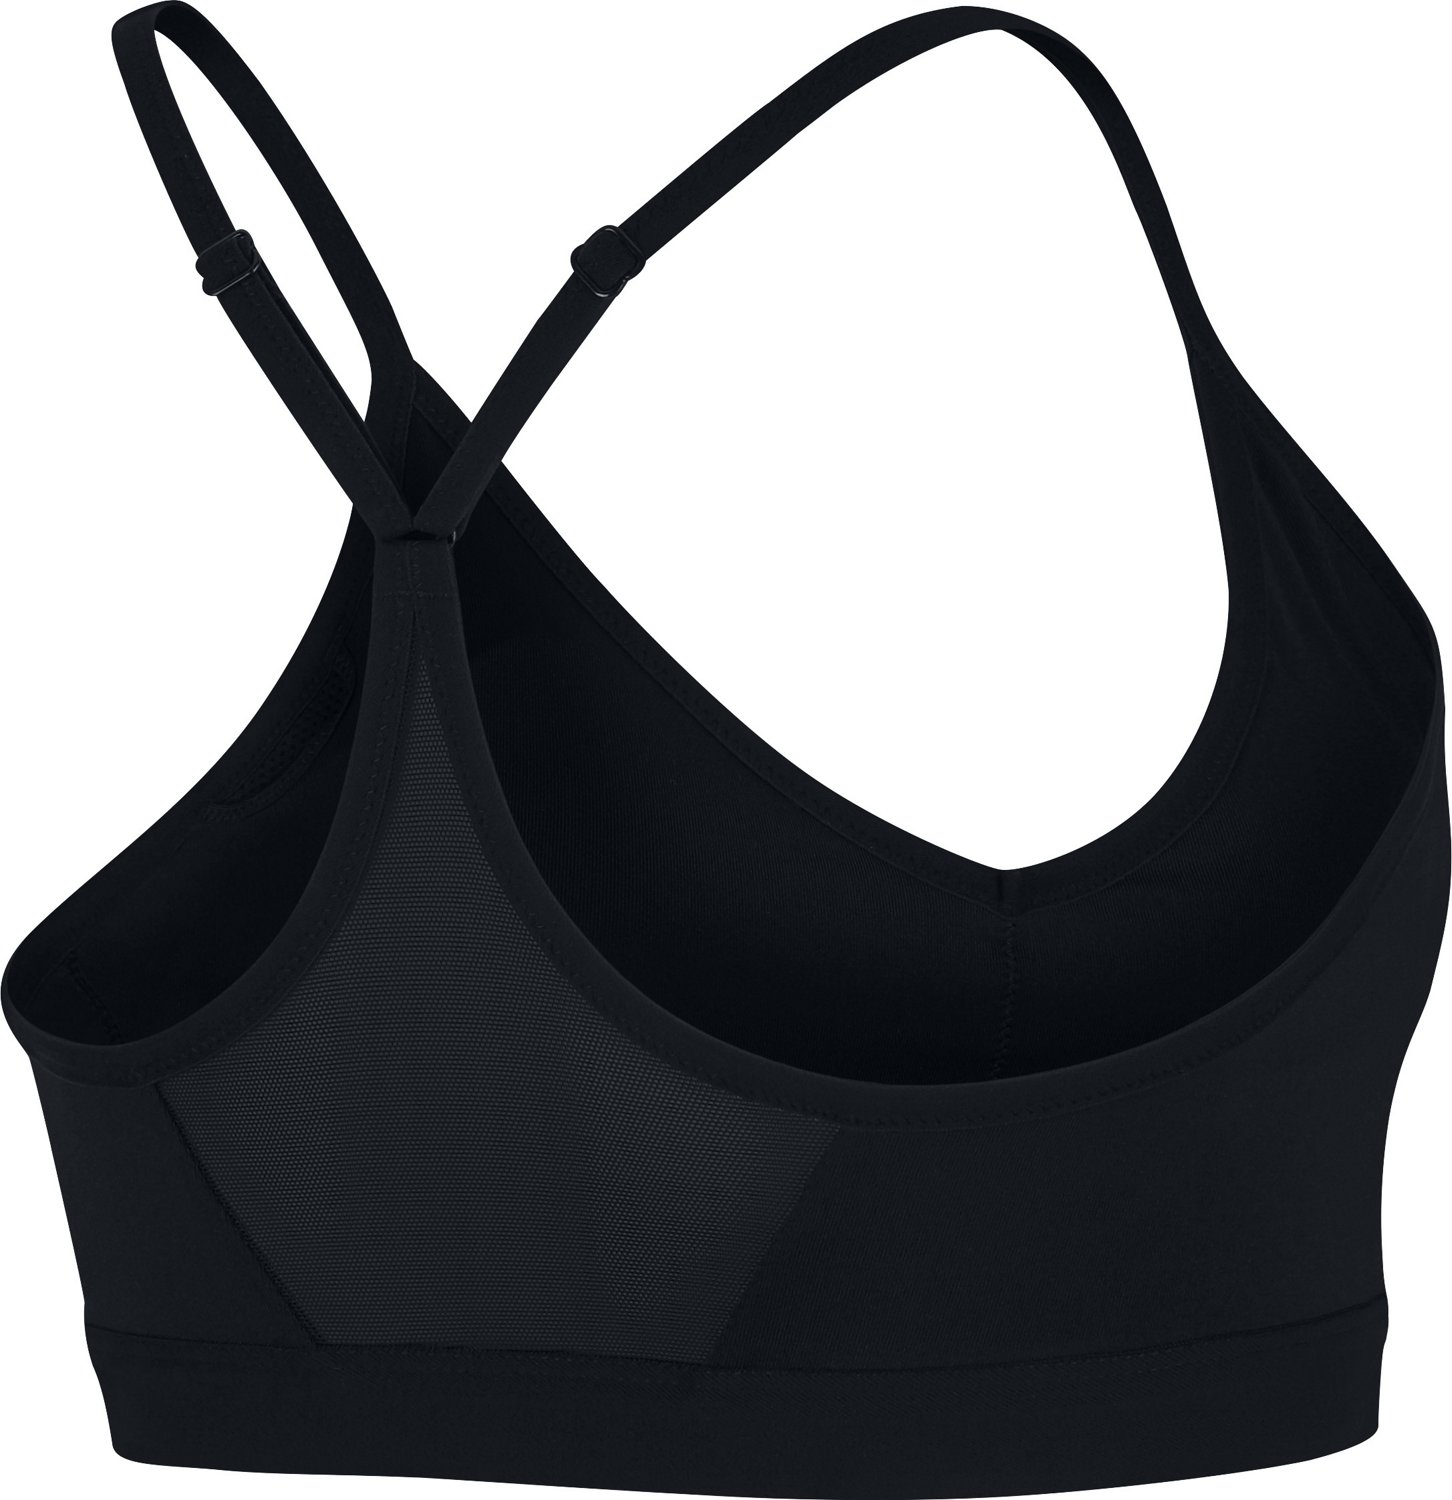 Nike Women's Indy Sports Bra | Free Shipping at Academy